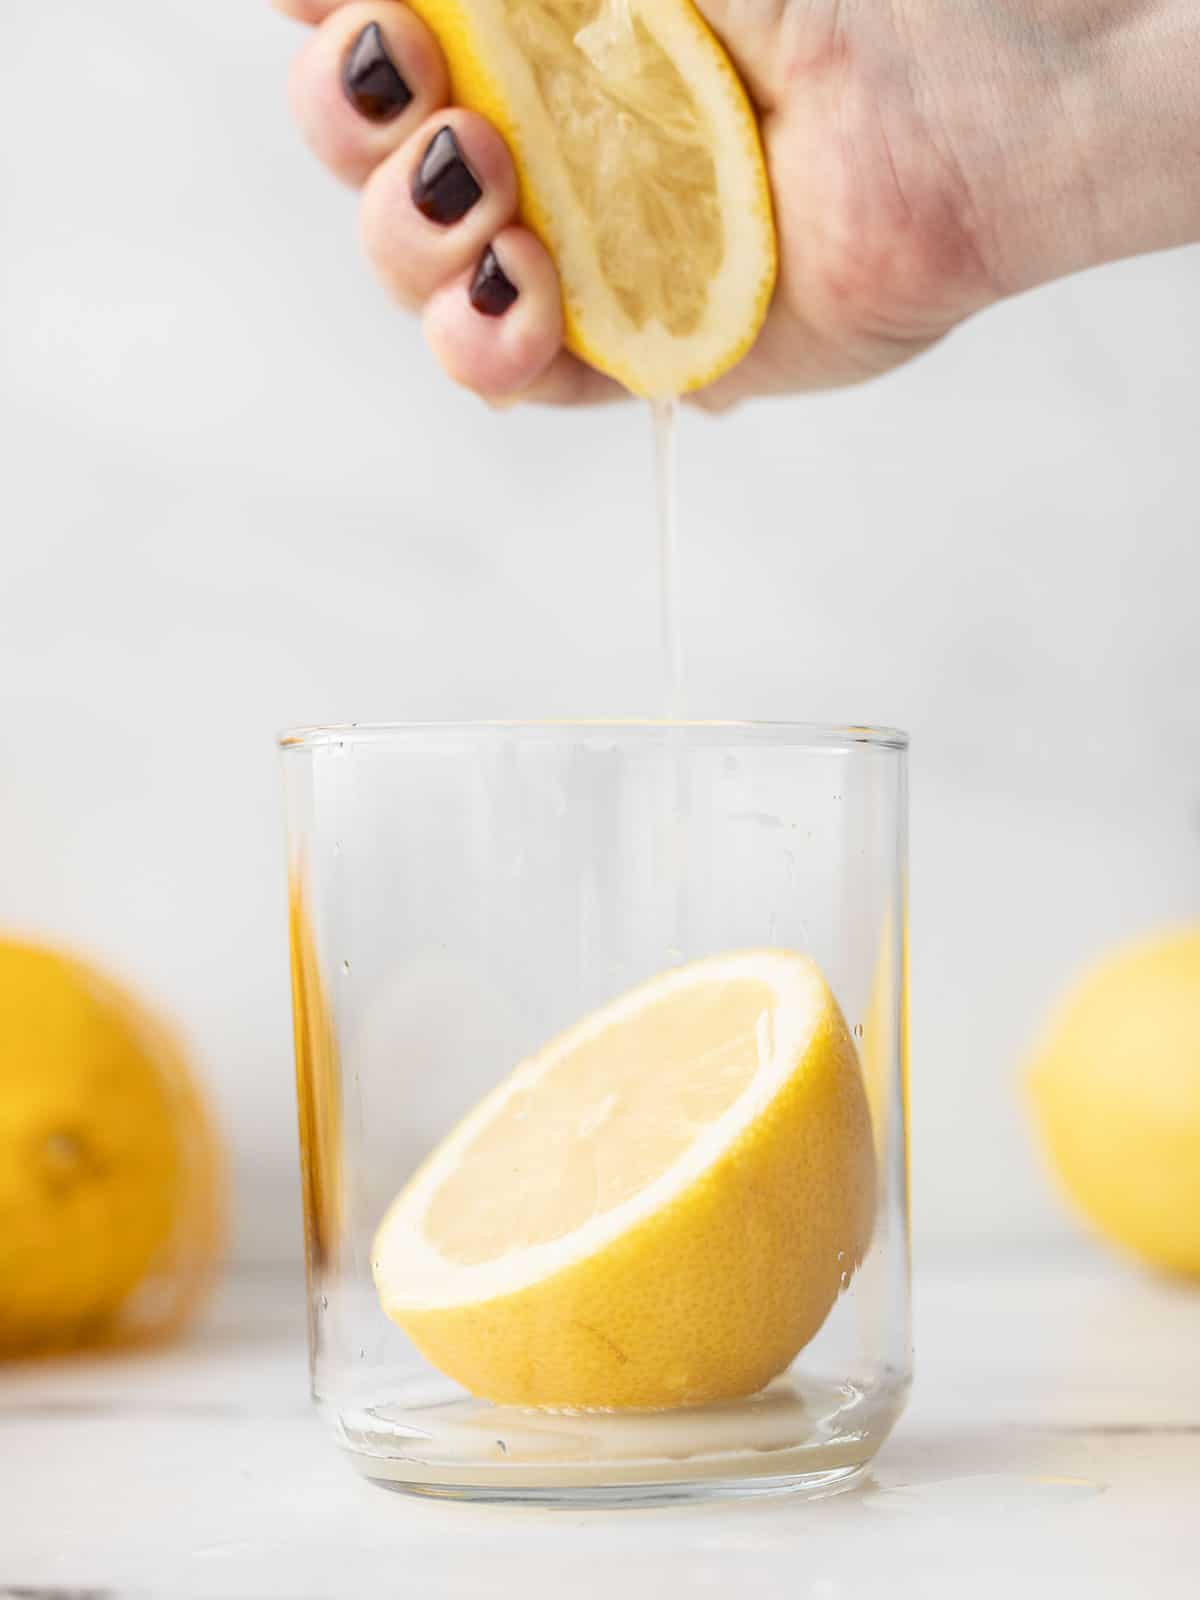 A hand squeezing a lemon into a glass